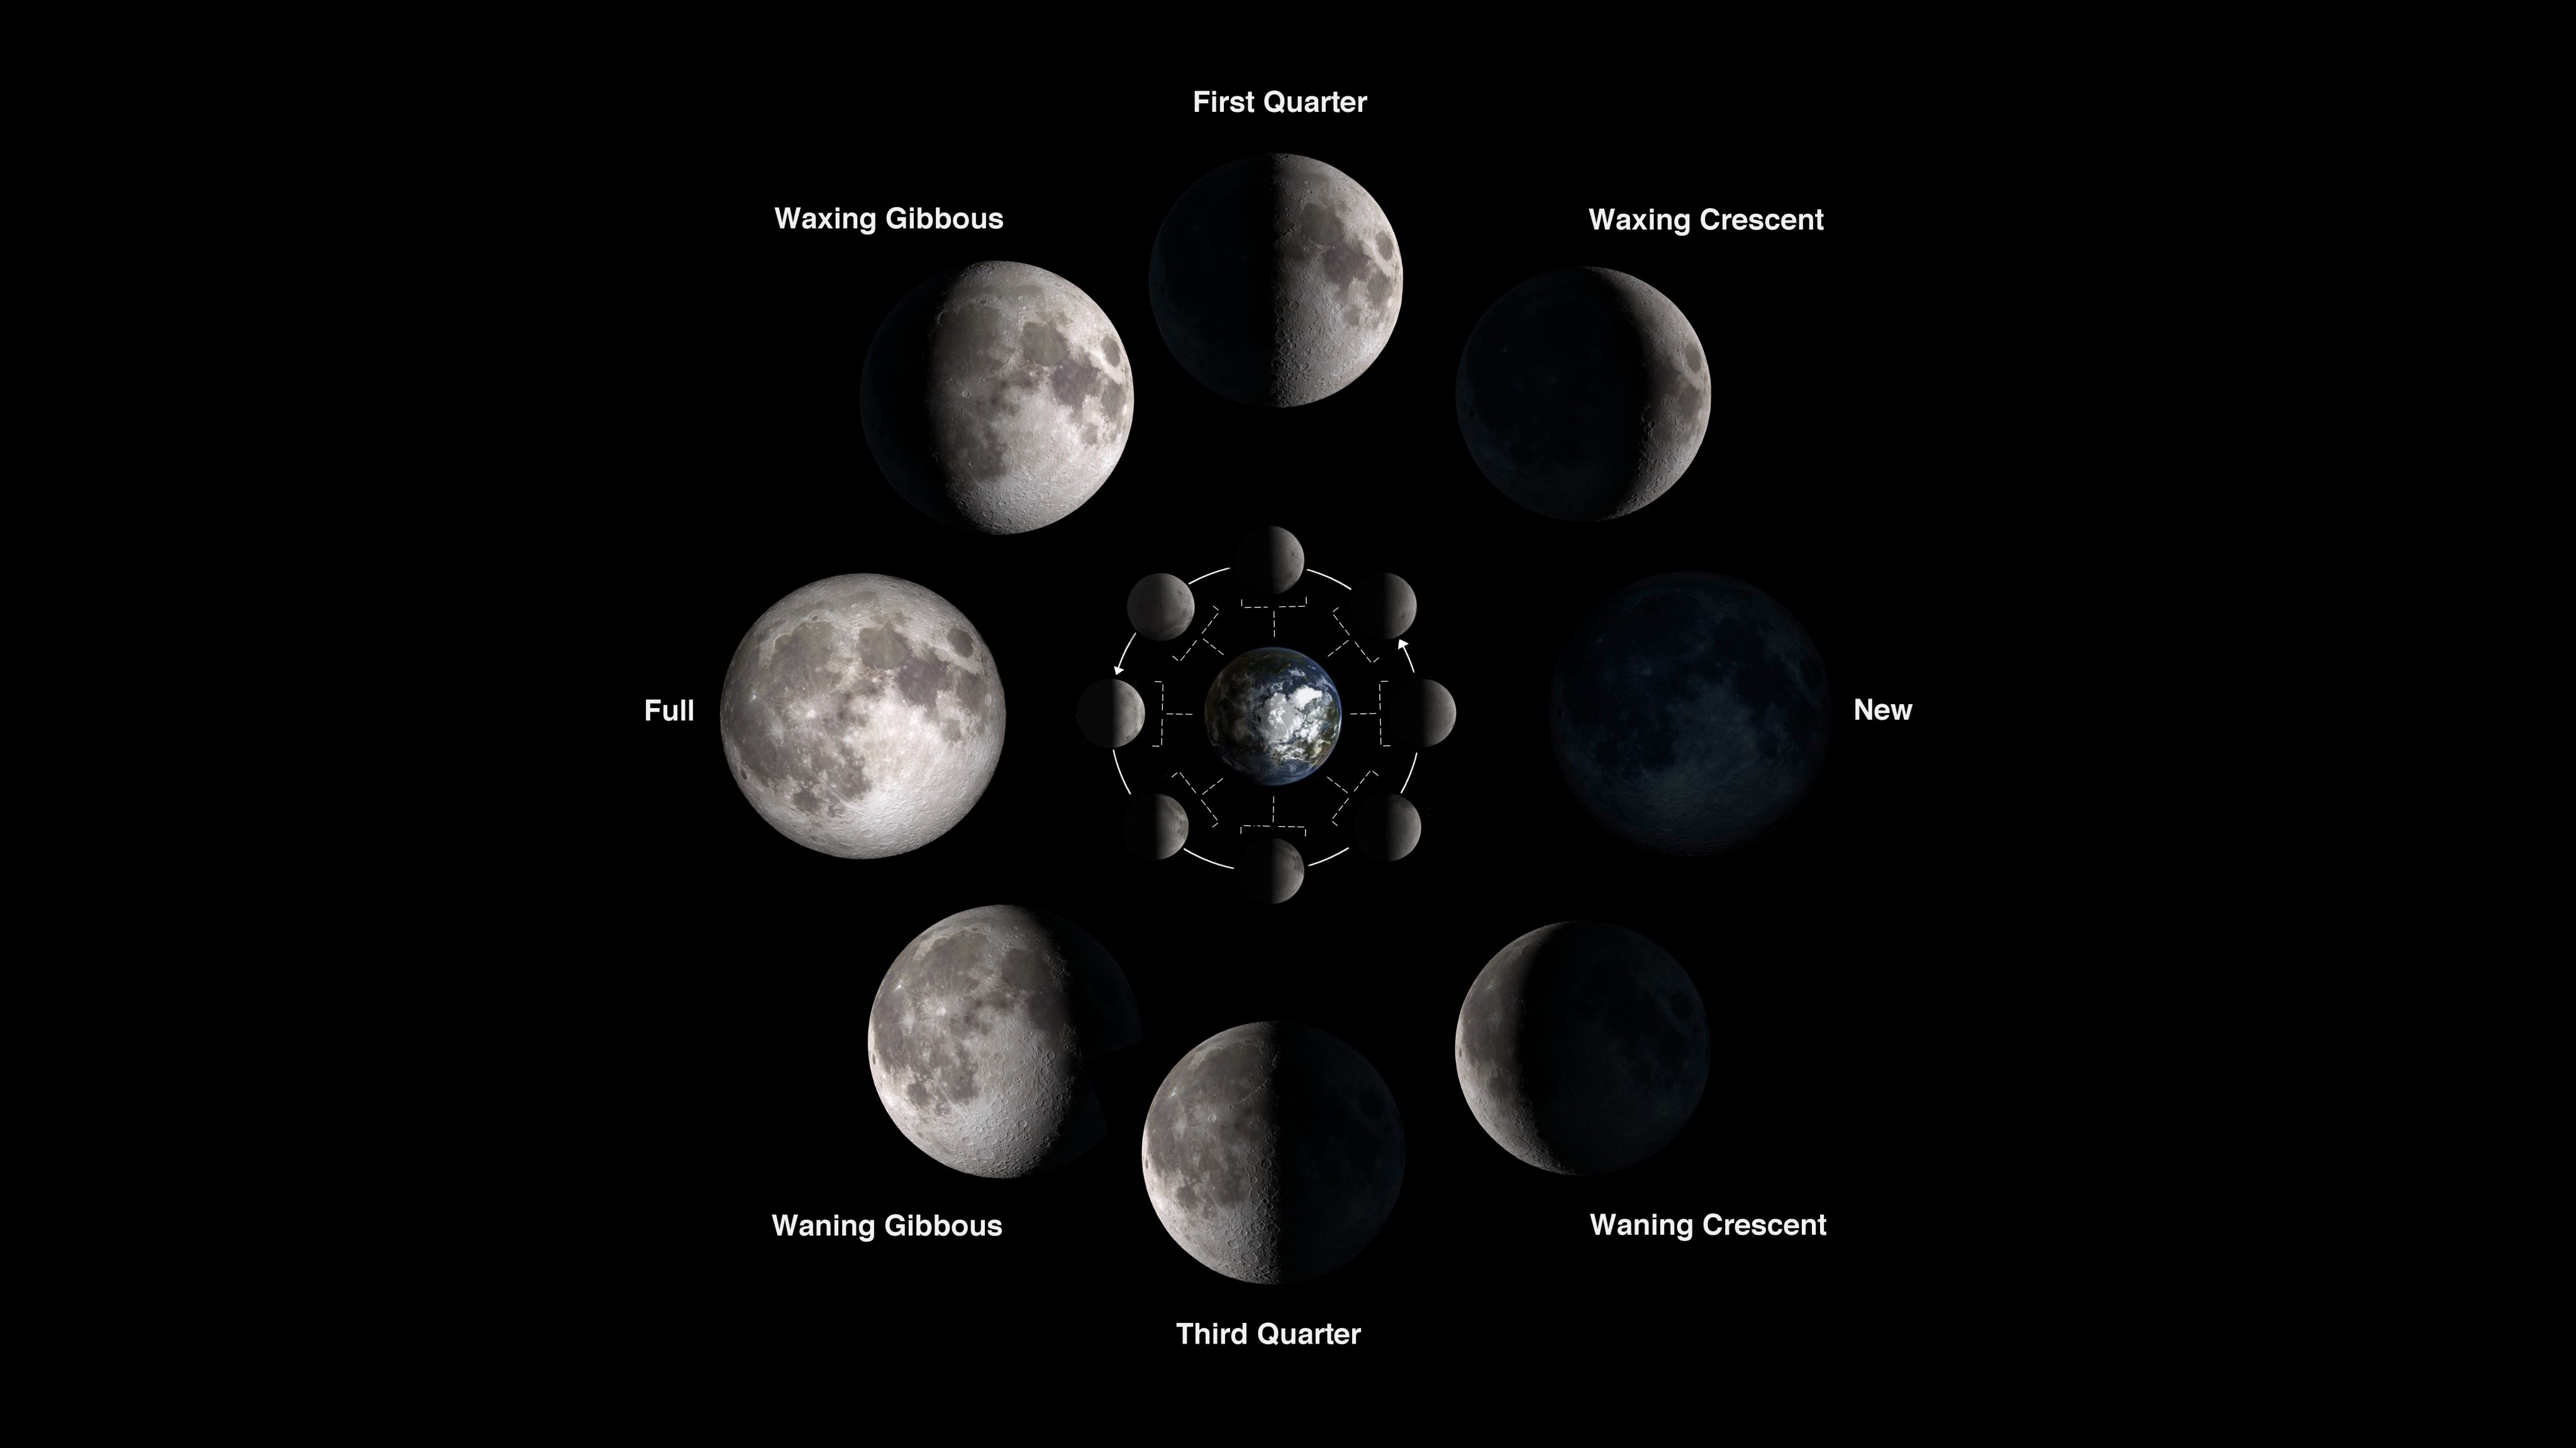 Watch a Lunar Eclipse, or at Least Try To - The New York Times